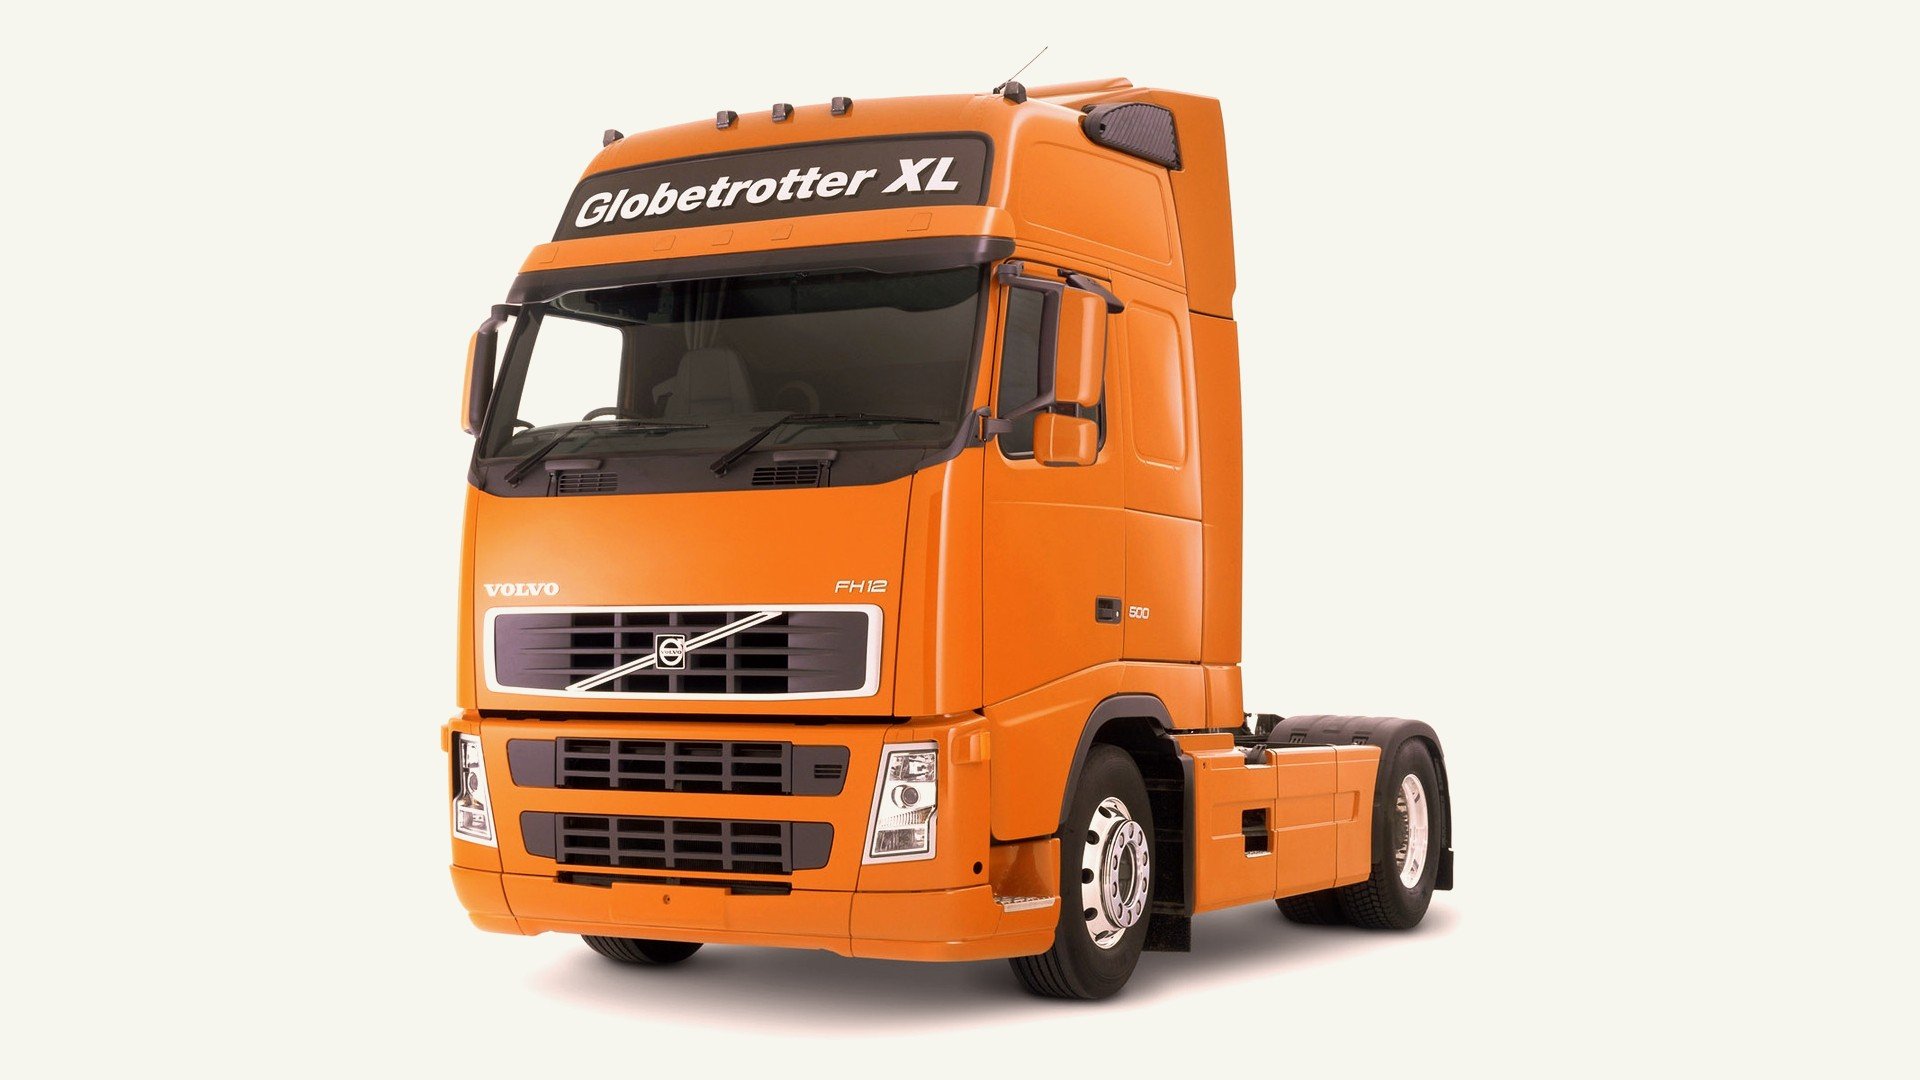 Wallpapers volvo fh globetrotter cars on the desktop